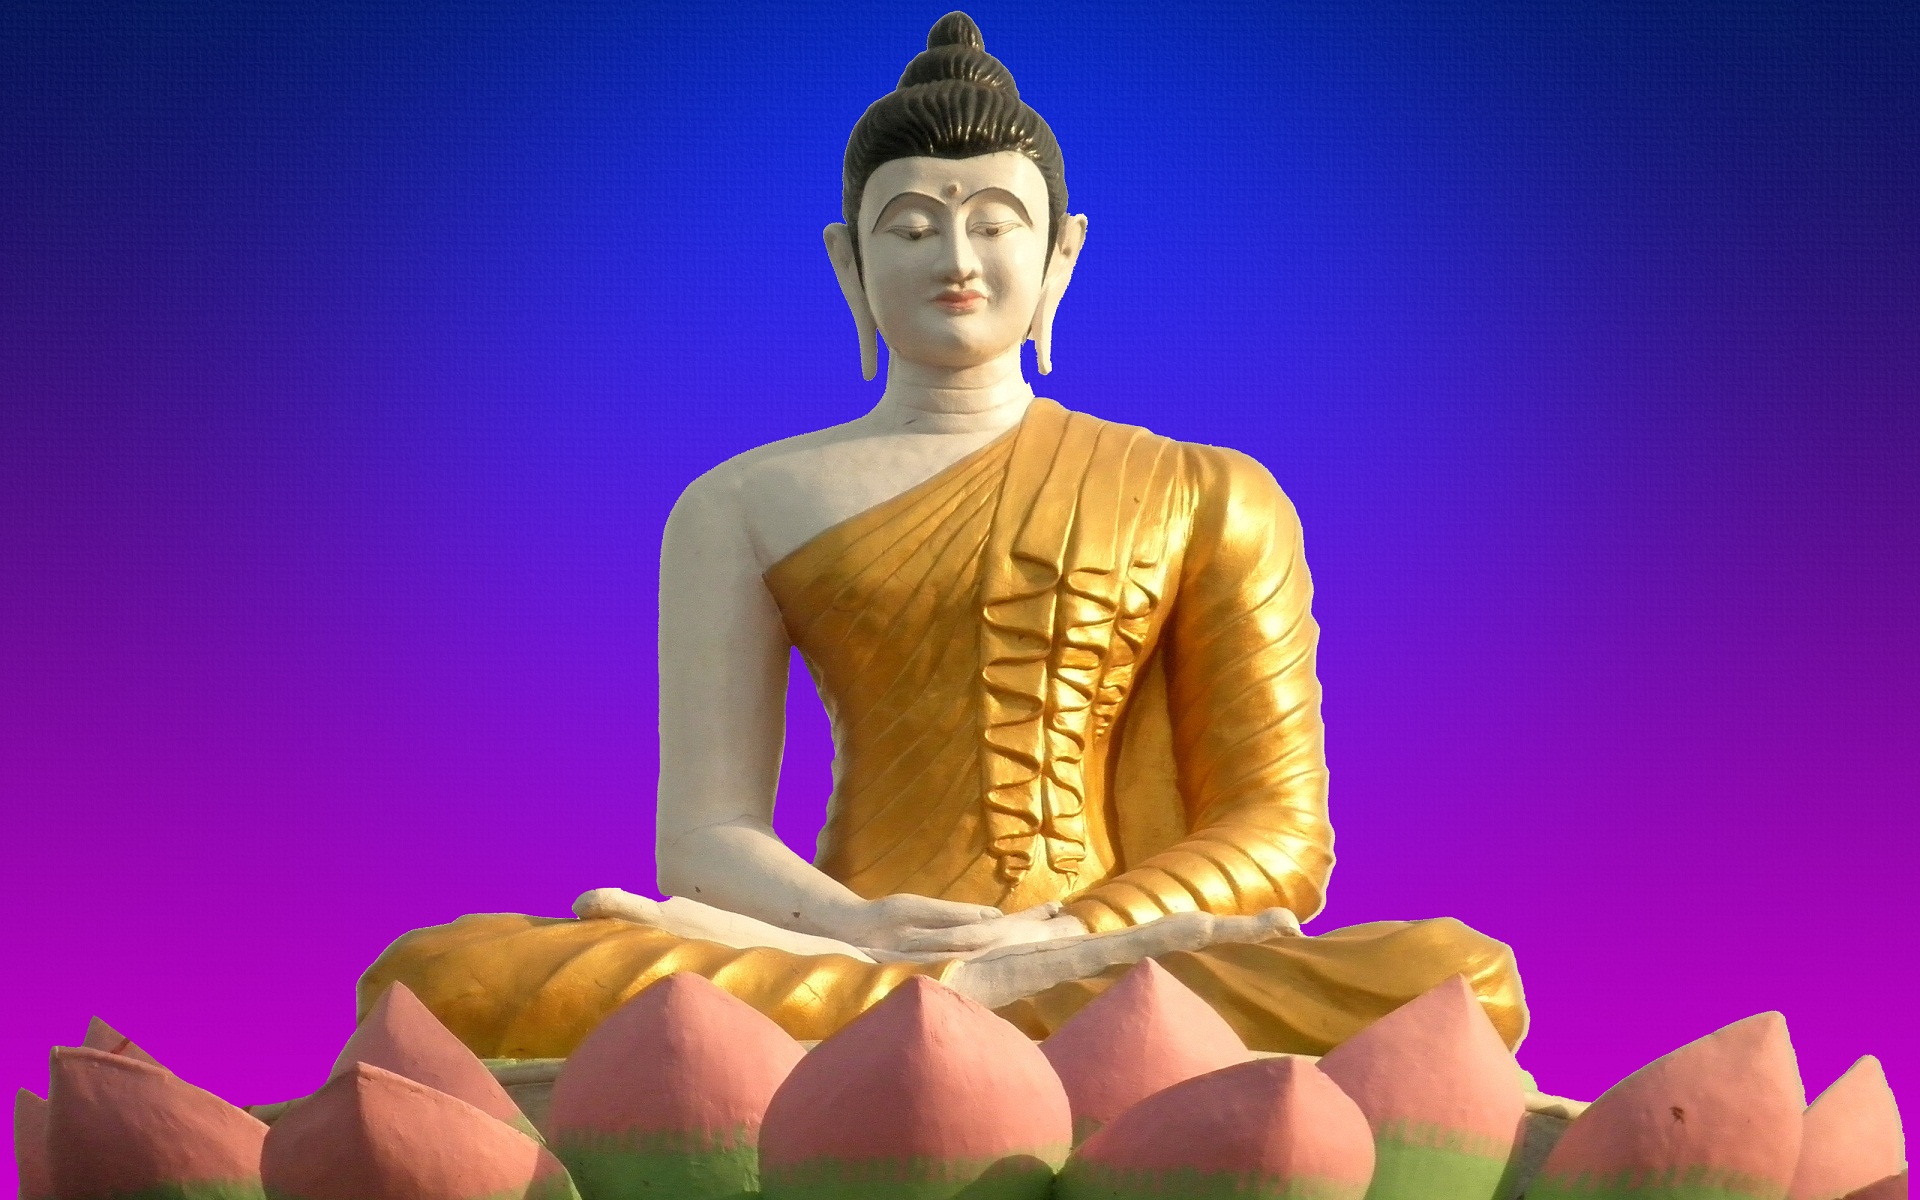 Buddha Wallpapers Download Group (73+)